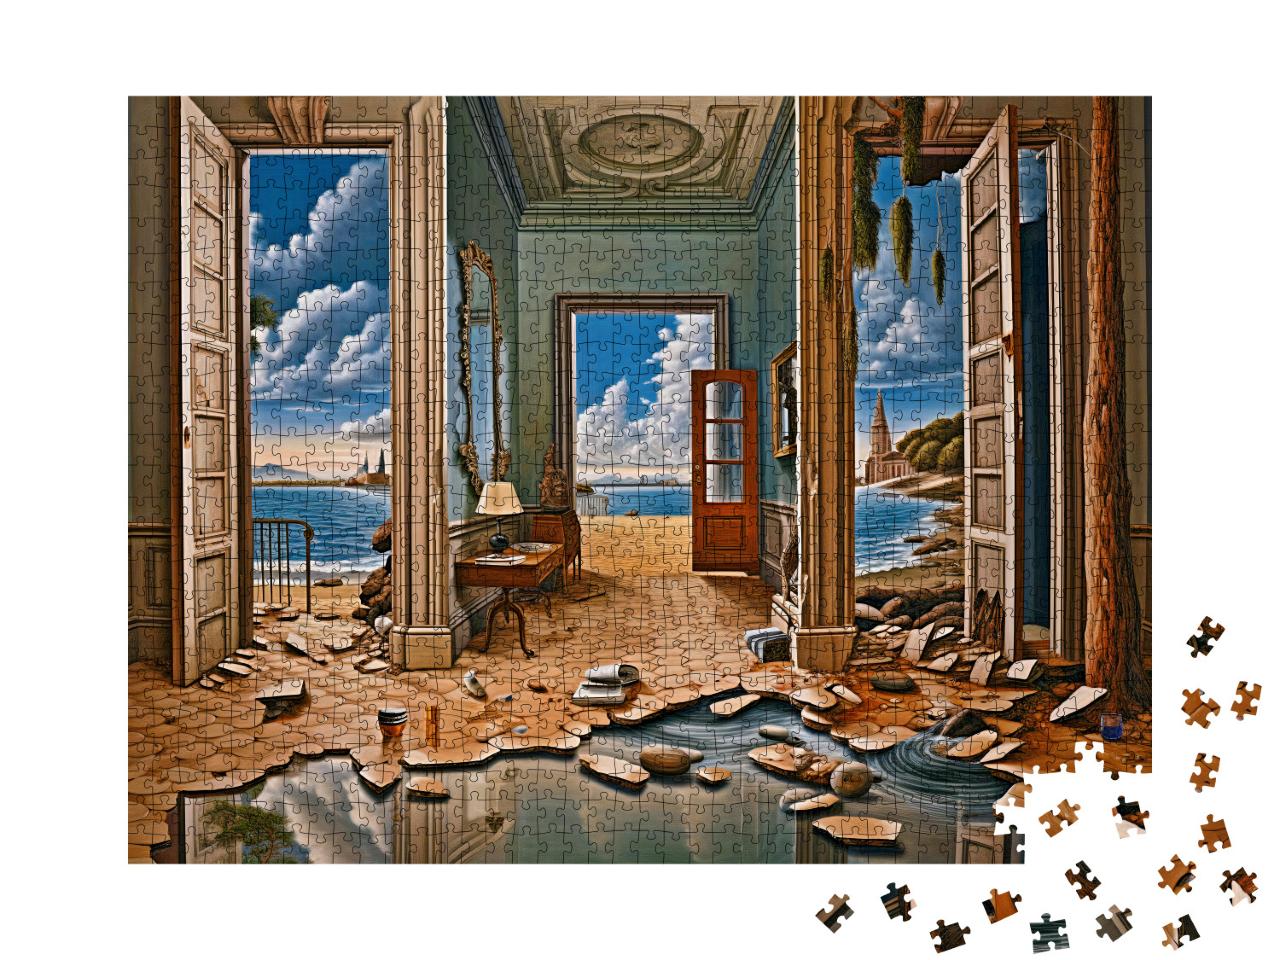 After the Storm, Seaside Destruction Jigsaw Puzzle with 1000 pieces